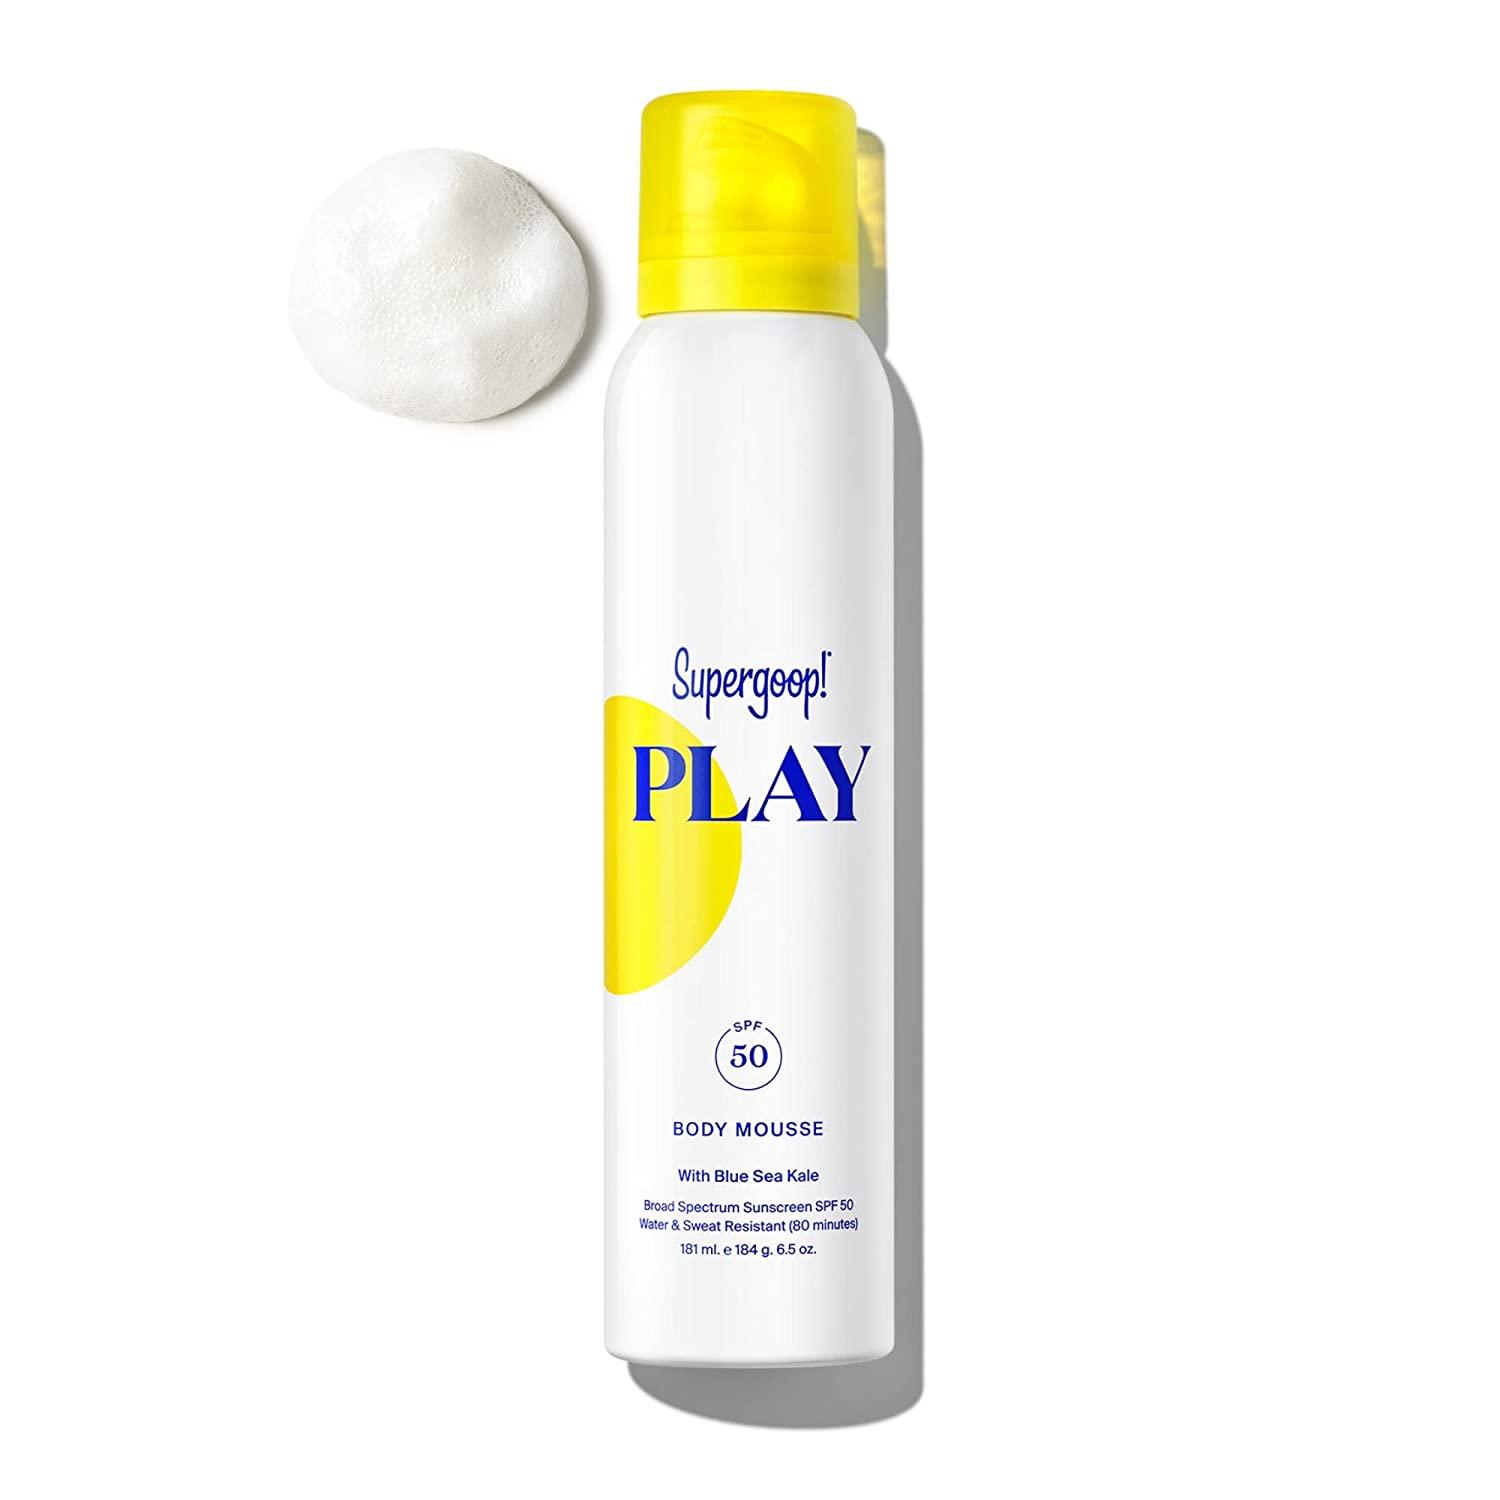 Play Body Mousse SPF 50 with Blue Sea Kale